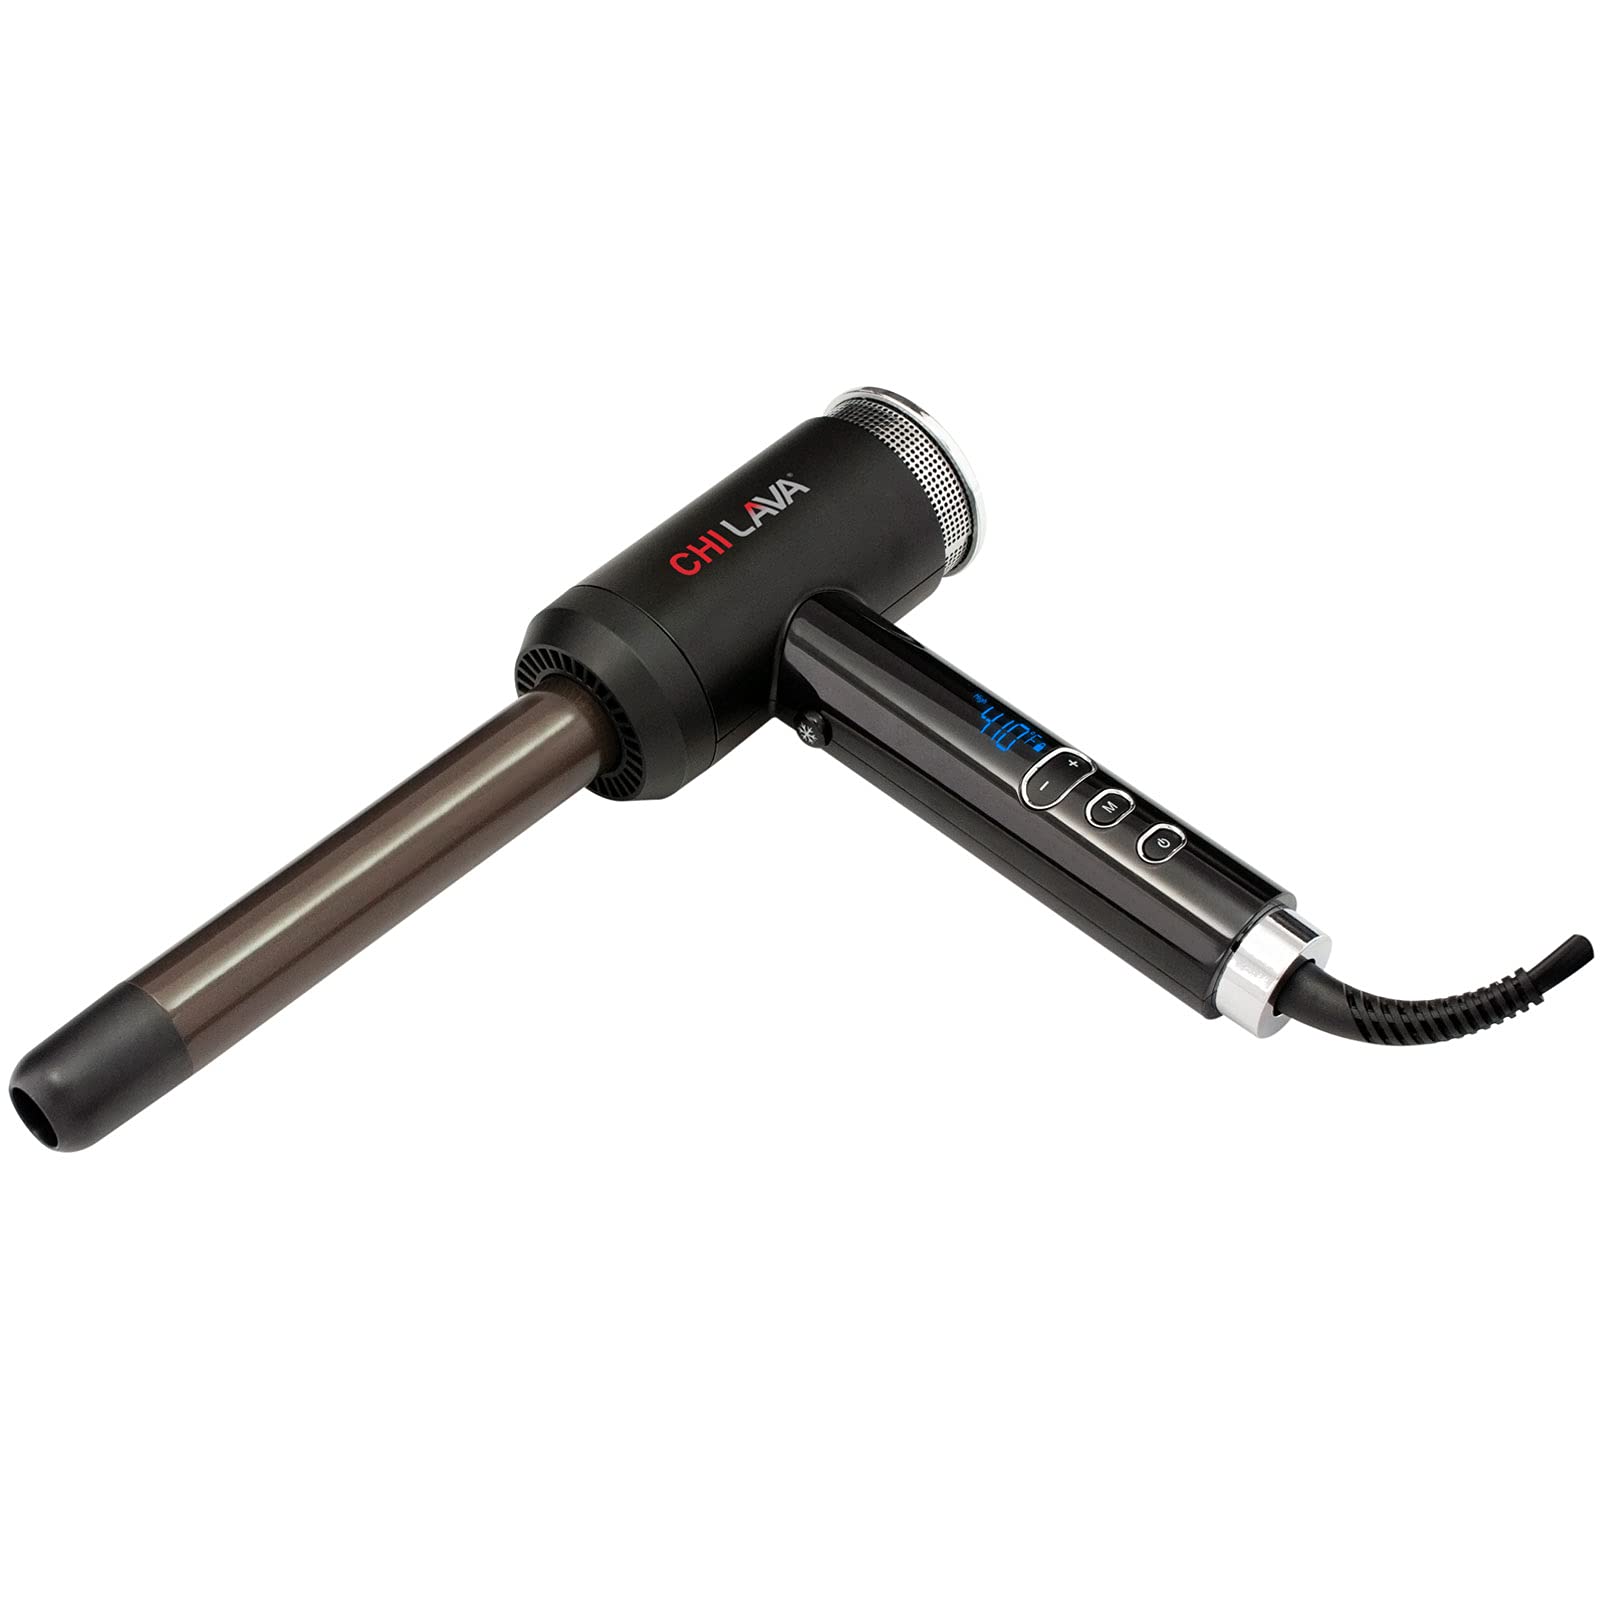 CHI Volcanic Lava Ceramic Curl Shot 1" Curling Iron With Cool Shot Locks In Curls. Durable Barrel. Smooth Glide. Ionic Shine., B